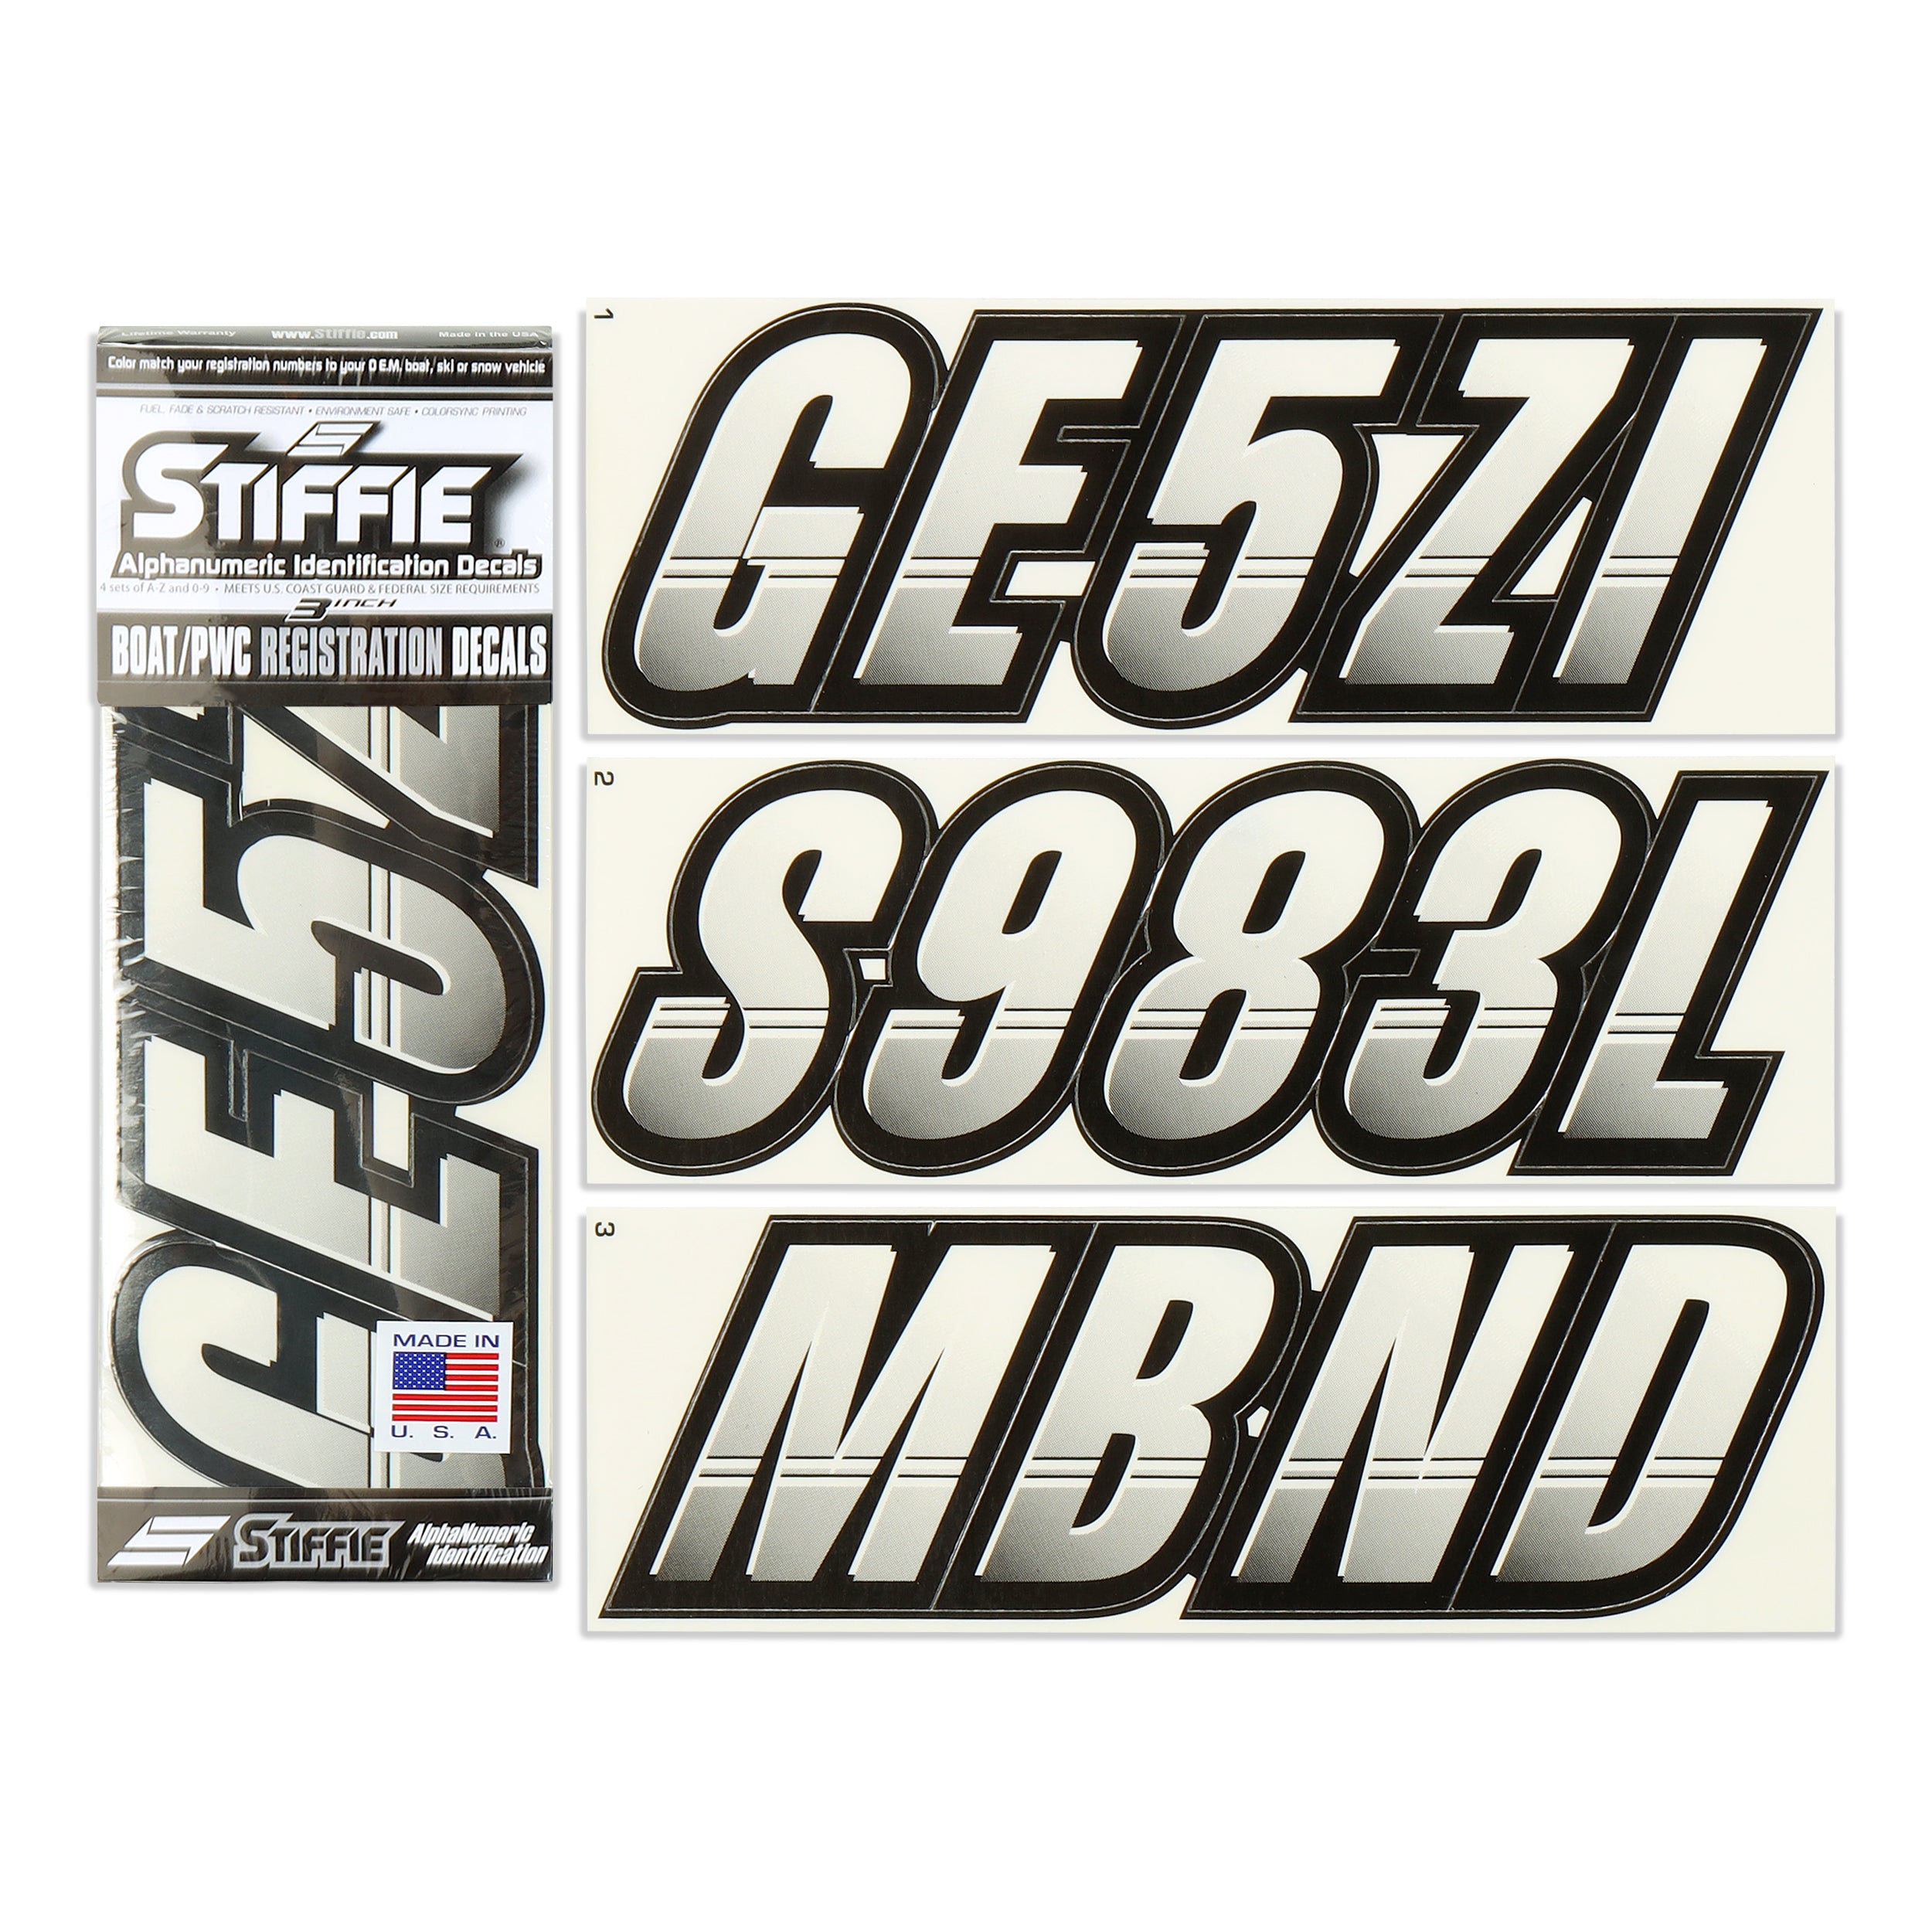 Stiffie Techtron Transparent Clear/Black 3" Alpha-Numeric Registration Identification Numbers Stickers Decals for Boats & Personal Watercraft